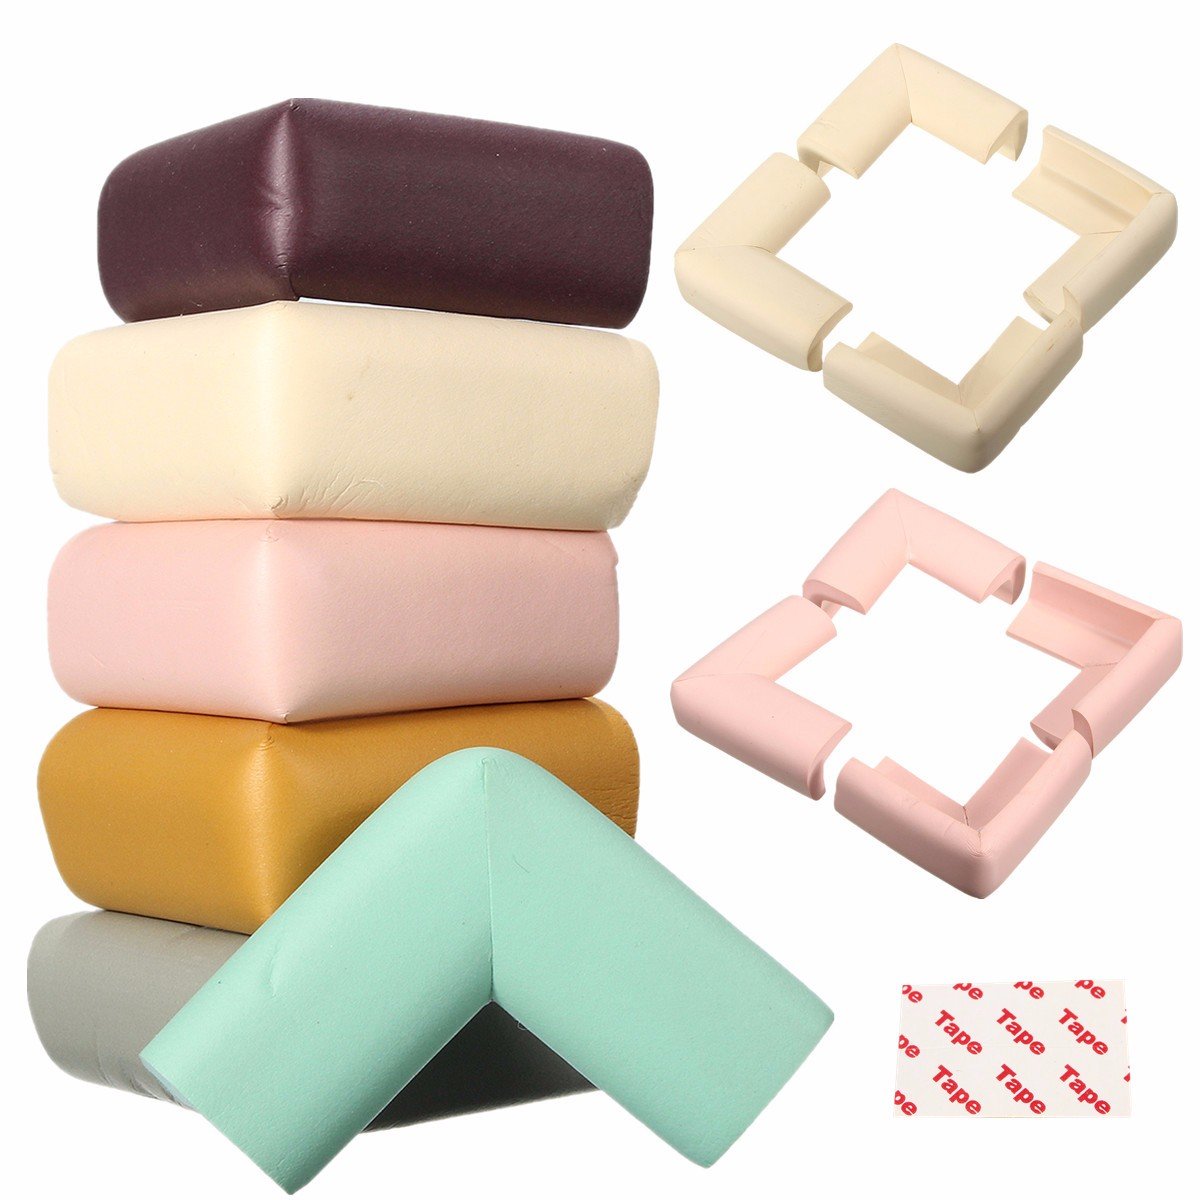 

4Pcs Baby Safety Table Desk Edge Cover Corner Cushion Guard Strip Softener Bumper Protector, Coffee green white grey brown pink